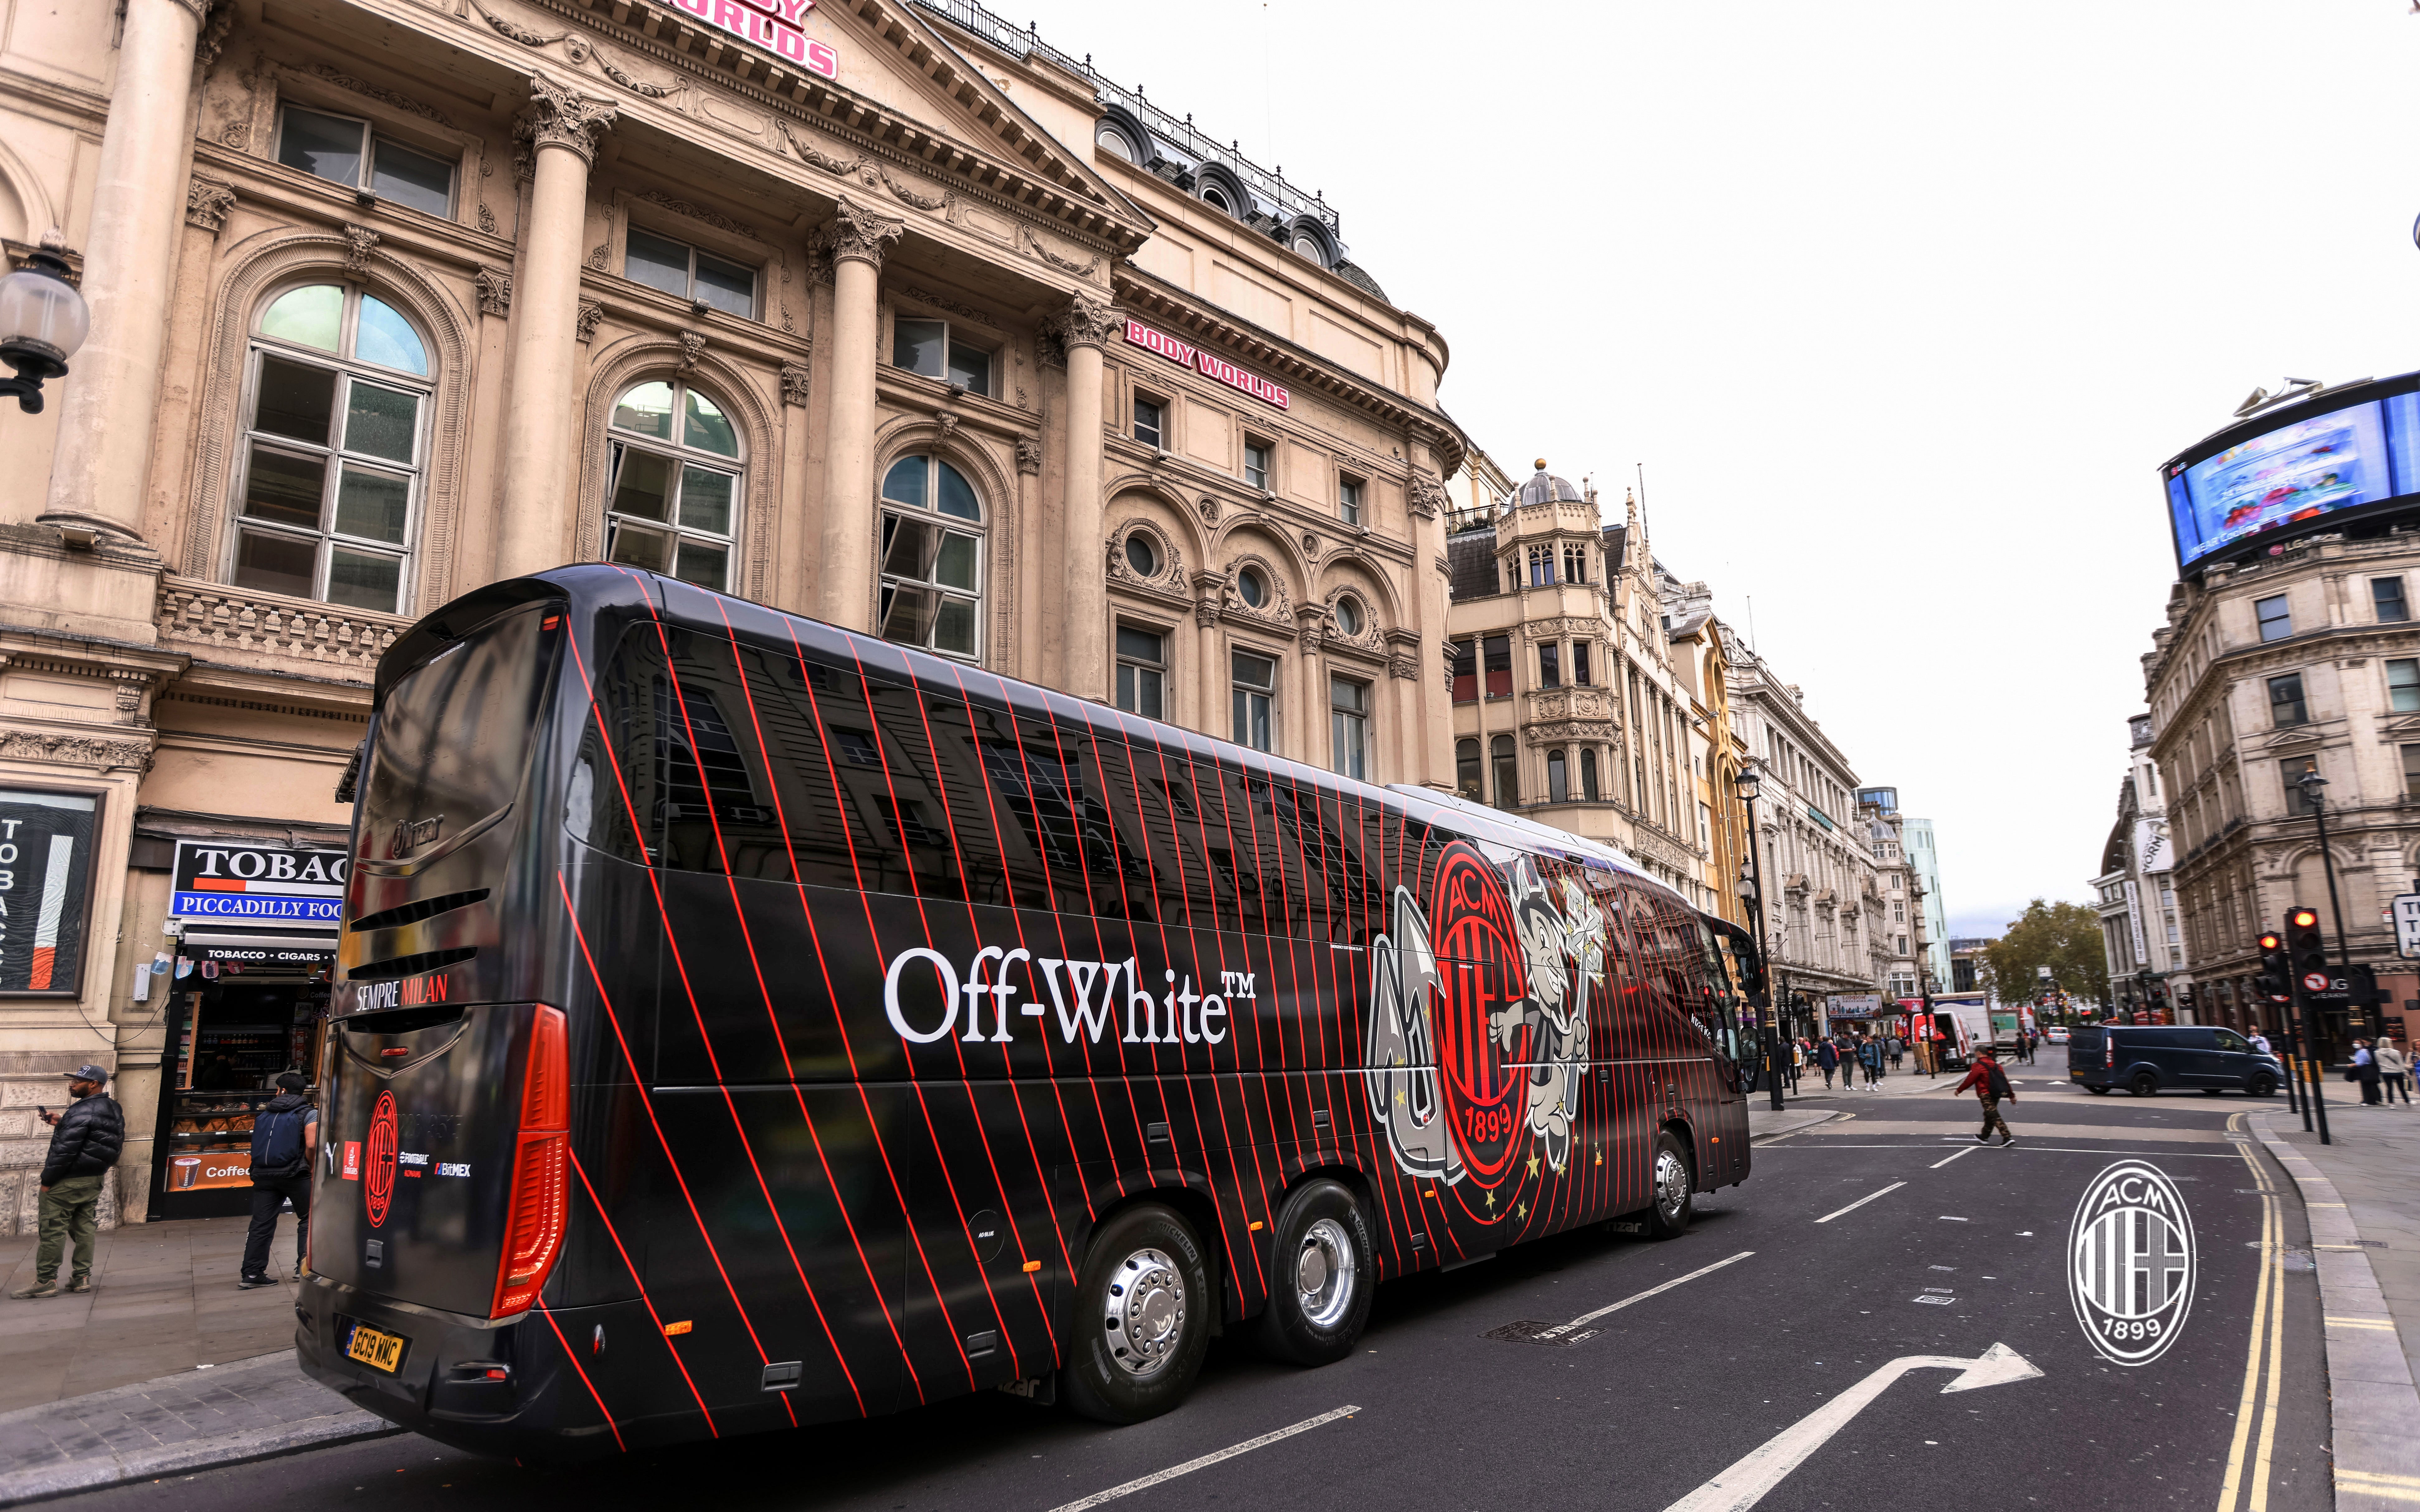 Off-White™ becomes AC Milan Style and Culture Curator